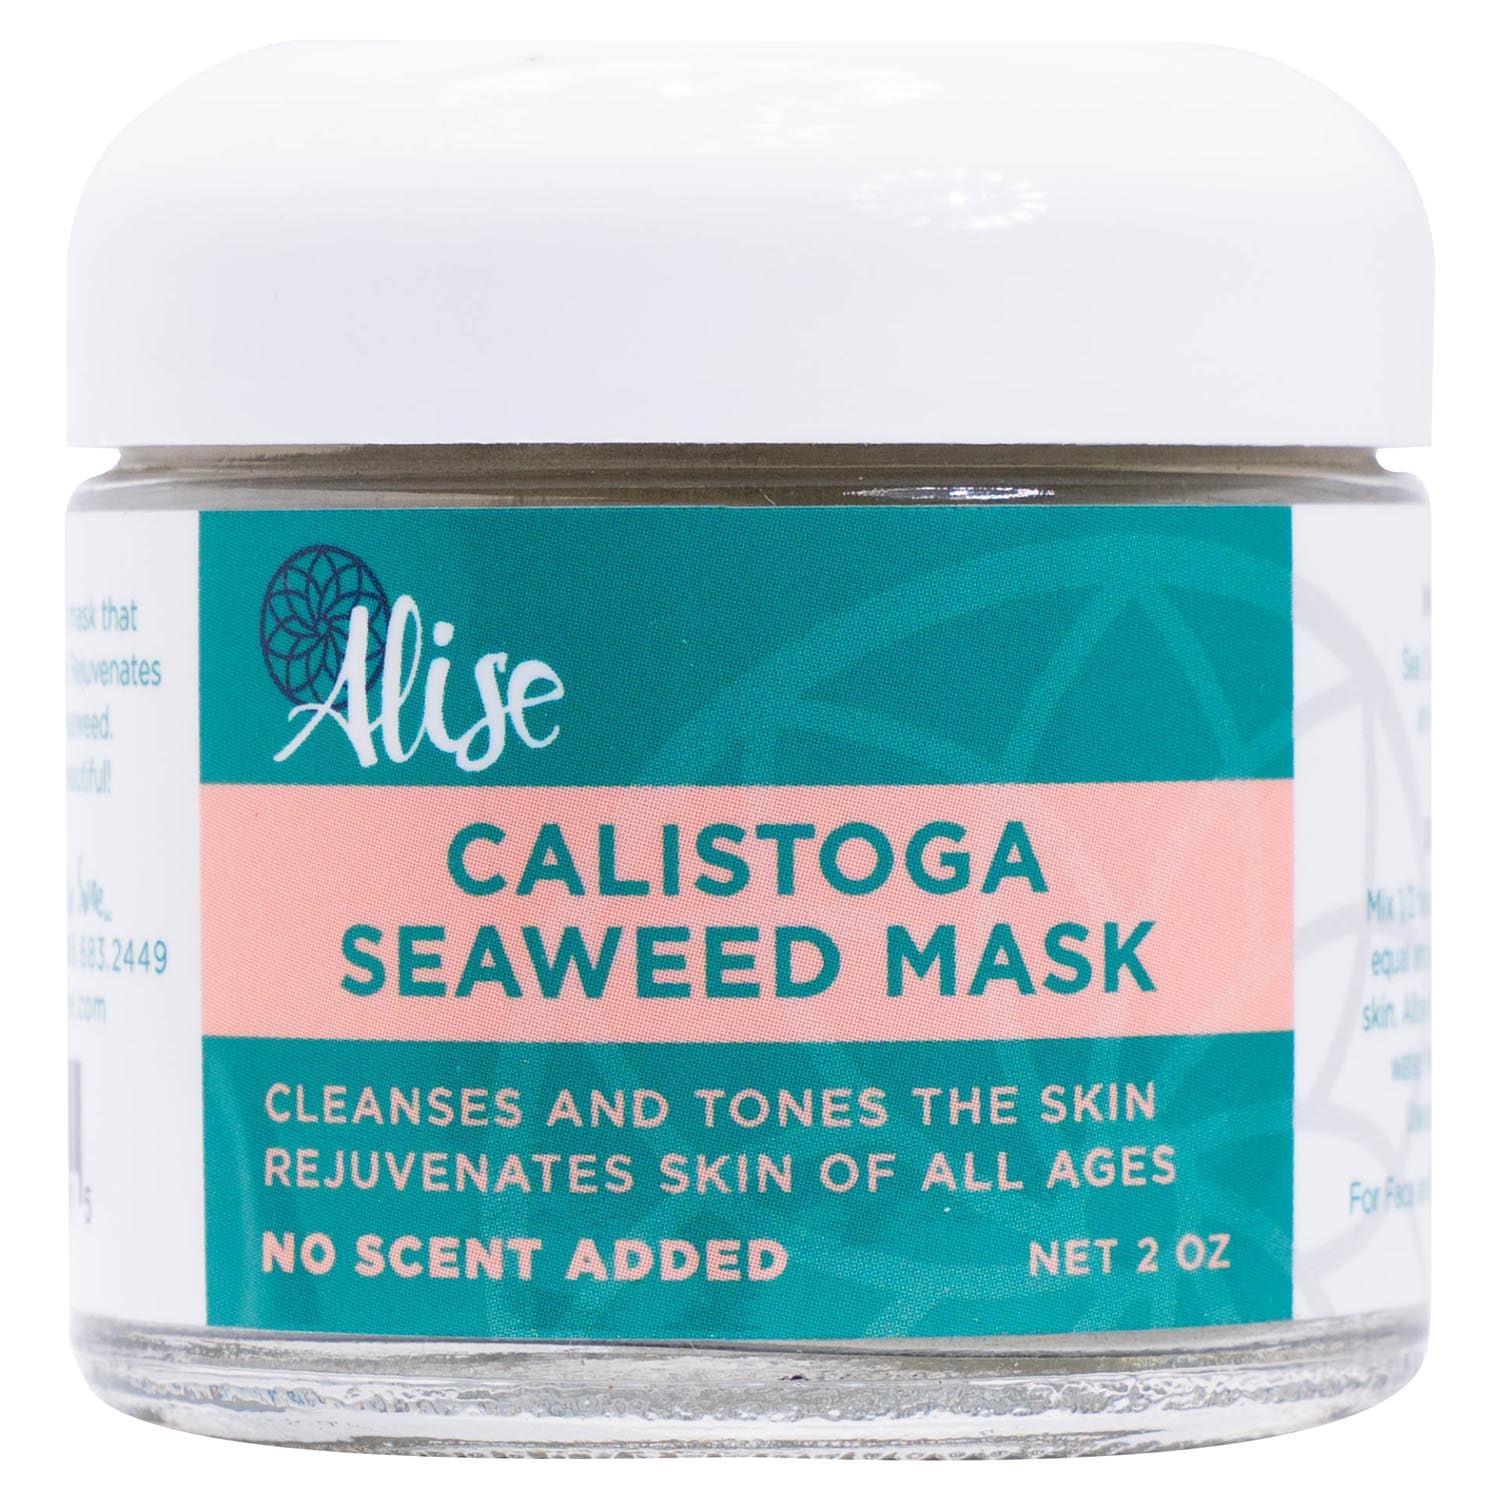 Calistoga Seaweed Mask 2oz handcrafted by Alise Body Care